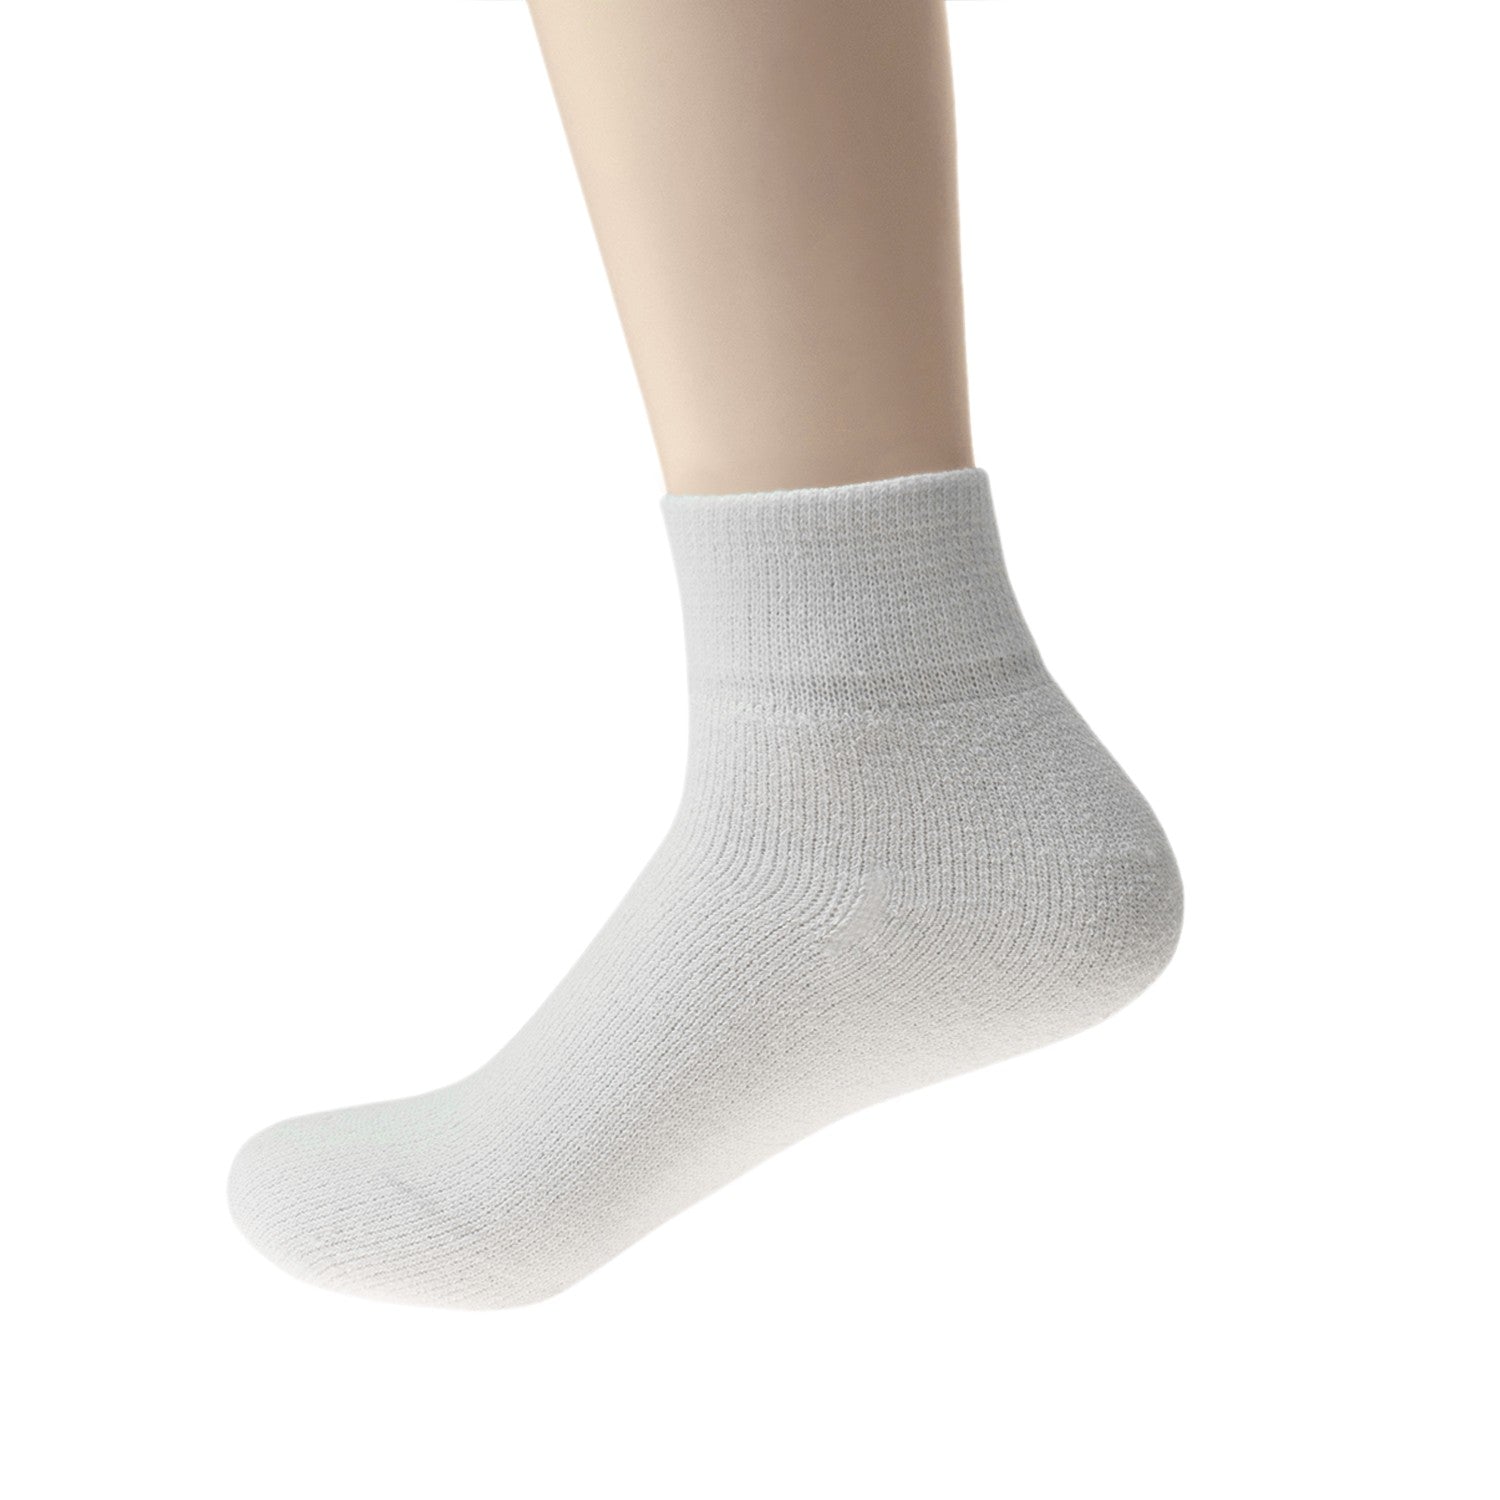 Wholesale Socks Men's Ankle Cut Athletic Size 10-13 in White